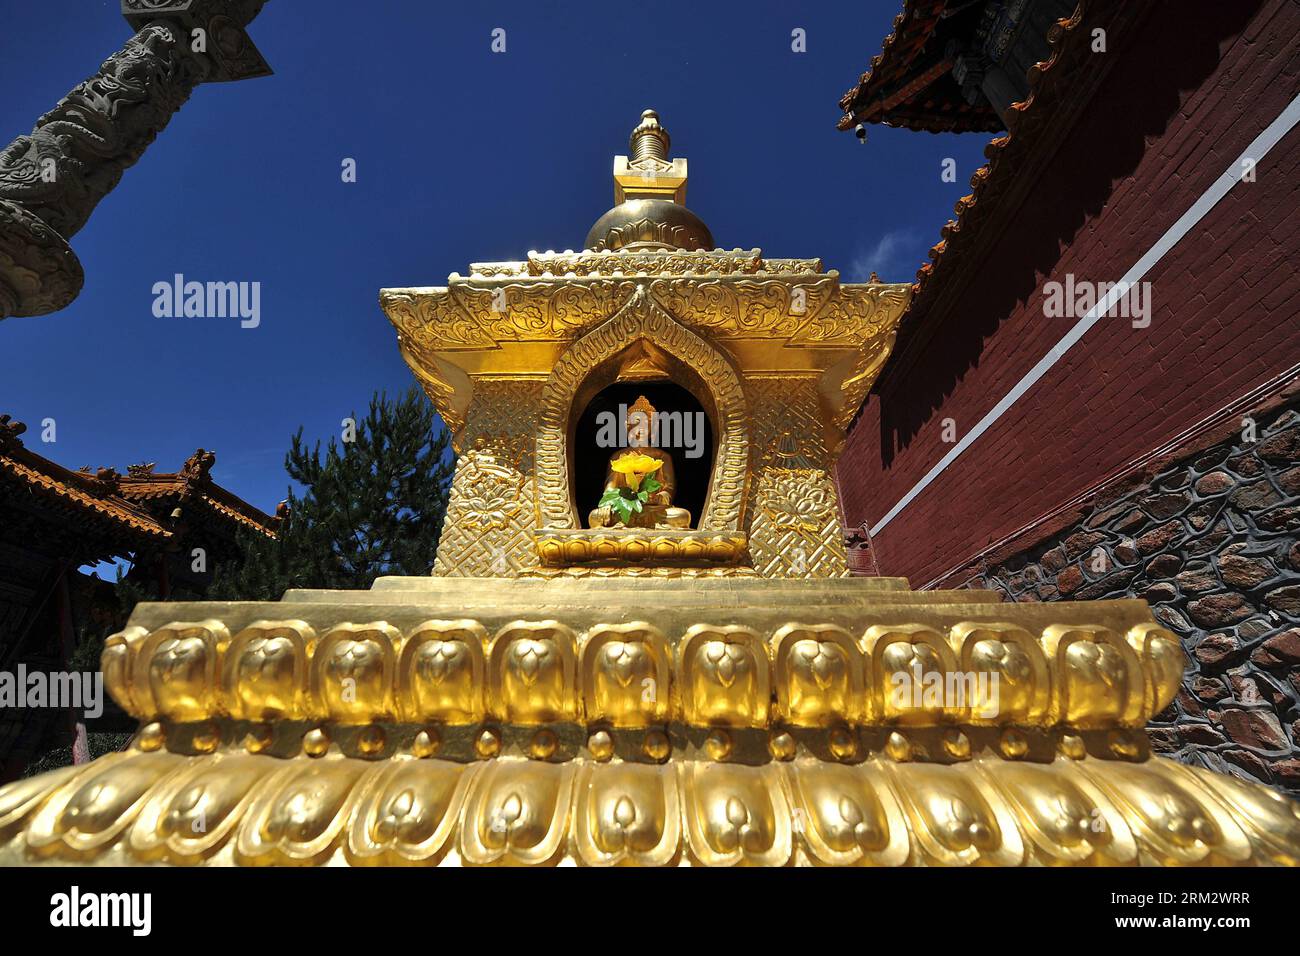 Bildnummer: 59909992  Datum: 26.06.2013  Copyright: imago/Xinhua MOUNT WUTAI, June 26, 2013 - Photo taken on June 26, 2013 shows a pagoda on Mount Wutai, one of four sacred Buddhist mountains in China, in north China s Shanxi Province. Added to UNESCO s World Heritage List in 2009, Mount Wutai is home to about 50 Buddhist temples built between the 1st century AD and the early 20th century. (Xinhua/Zhan Yan) (ry) CHINA-SHANXI-MOUNT WUTAI (CN) PUBLICATIONxNOTxINxCHN Gesellschaft Religion Fotostory xjh x0x 2013 quer     59909992 Date 26 06 2013 Copyright Imago XINHUA Mount Wutai June 26 2013 Phot Stock Photo